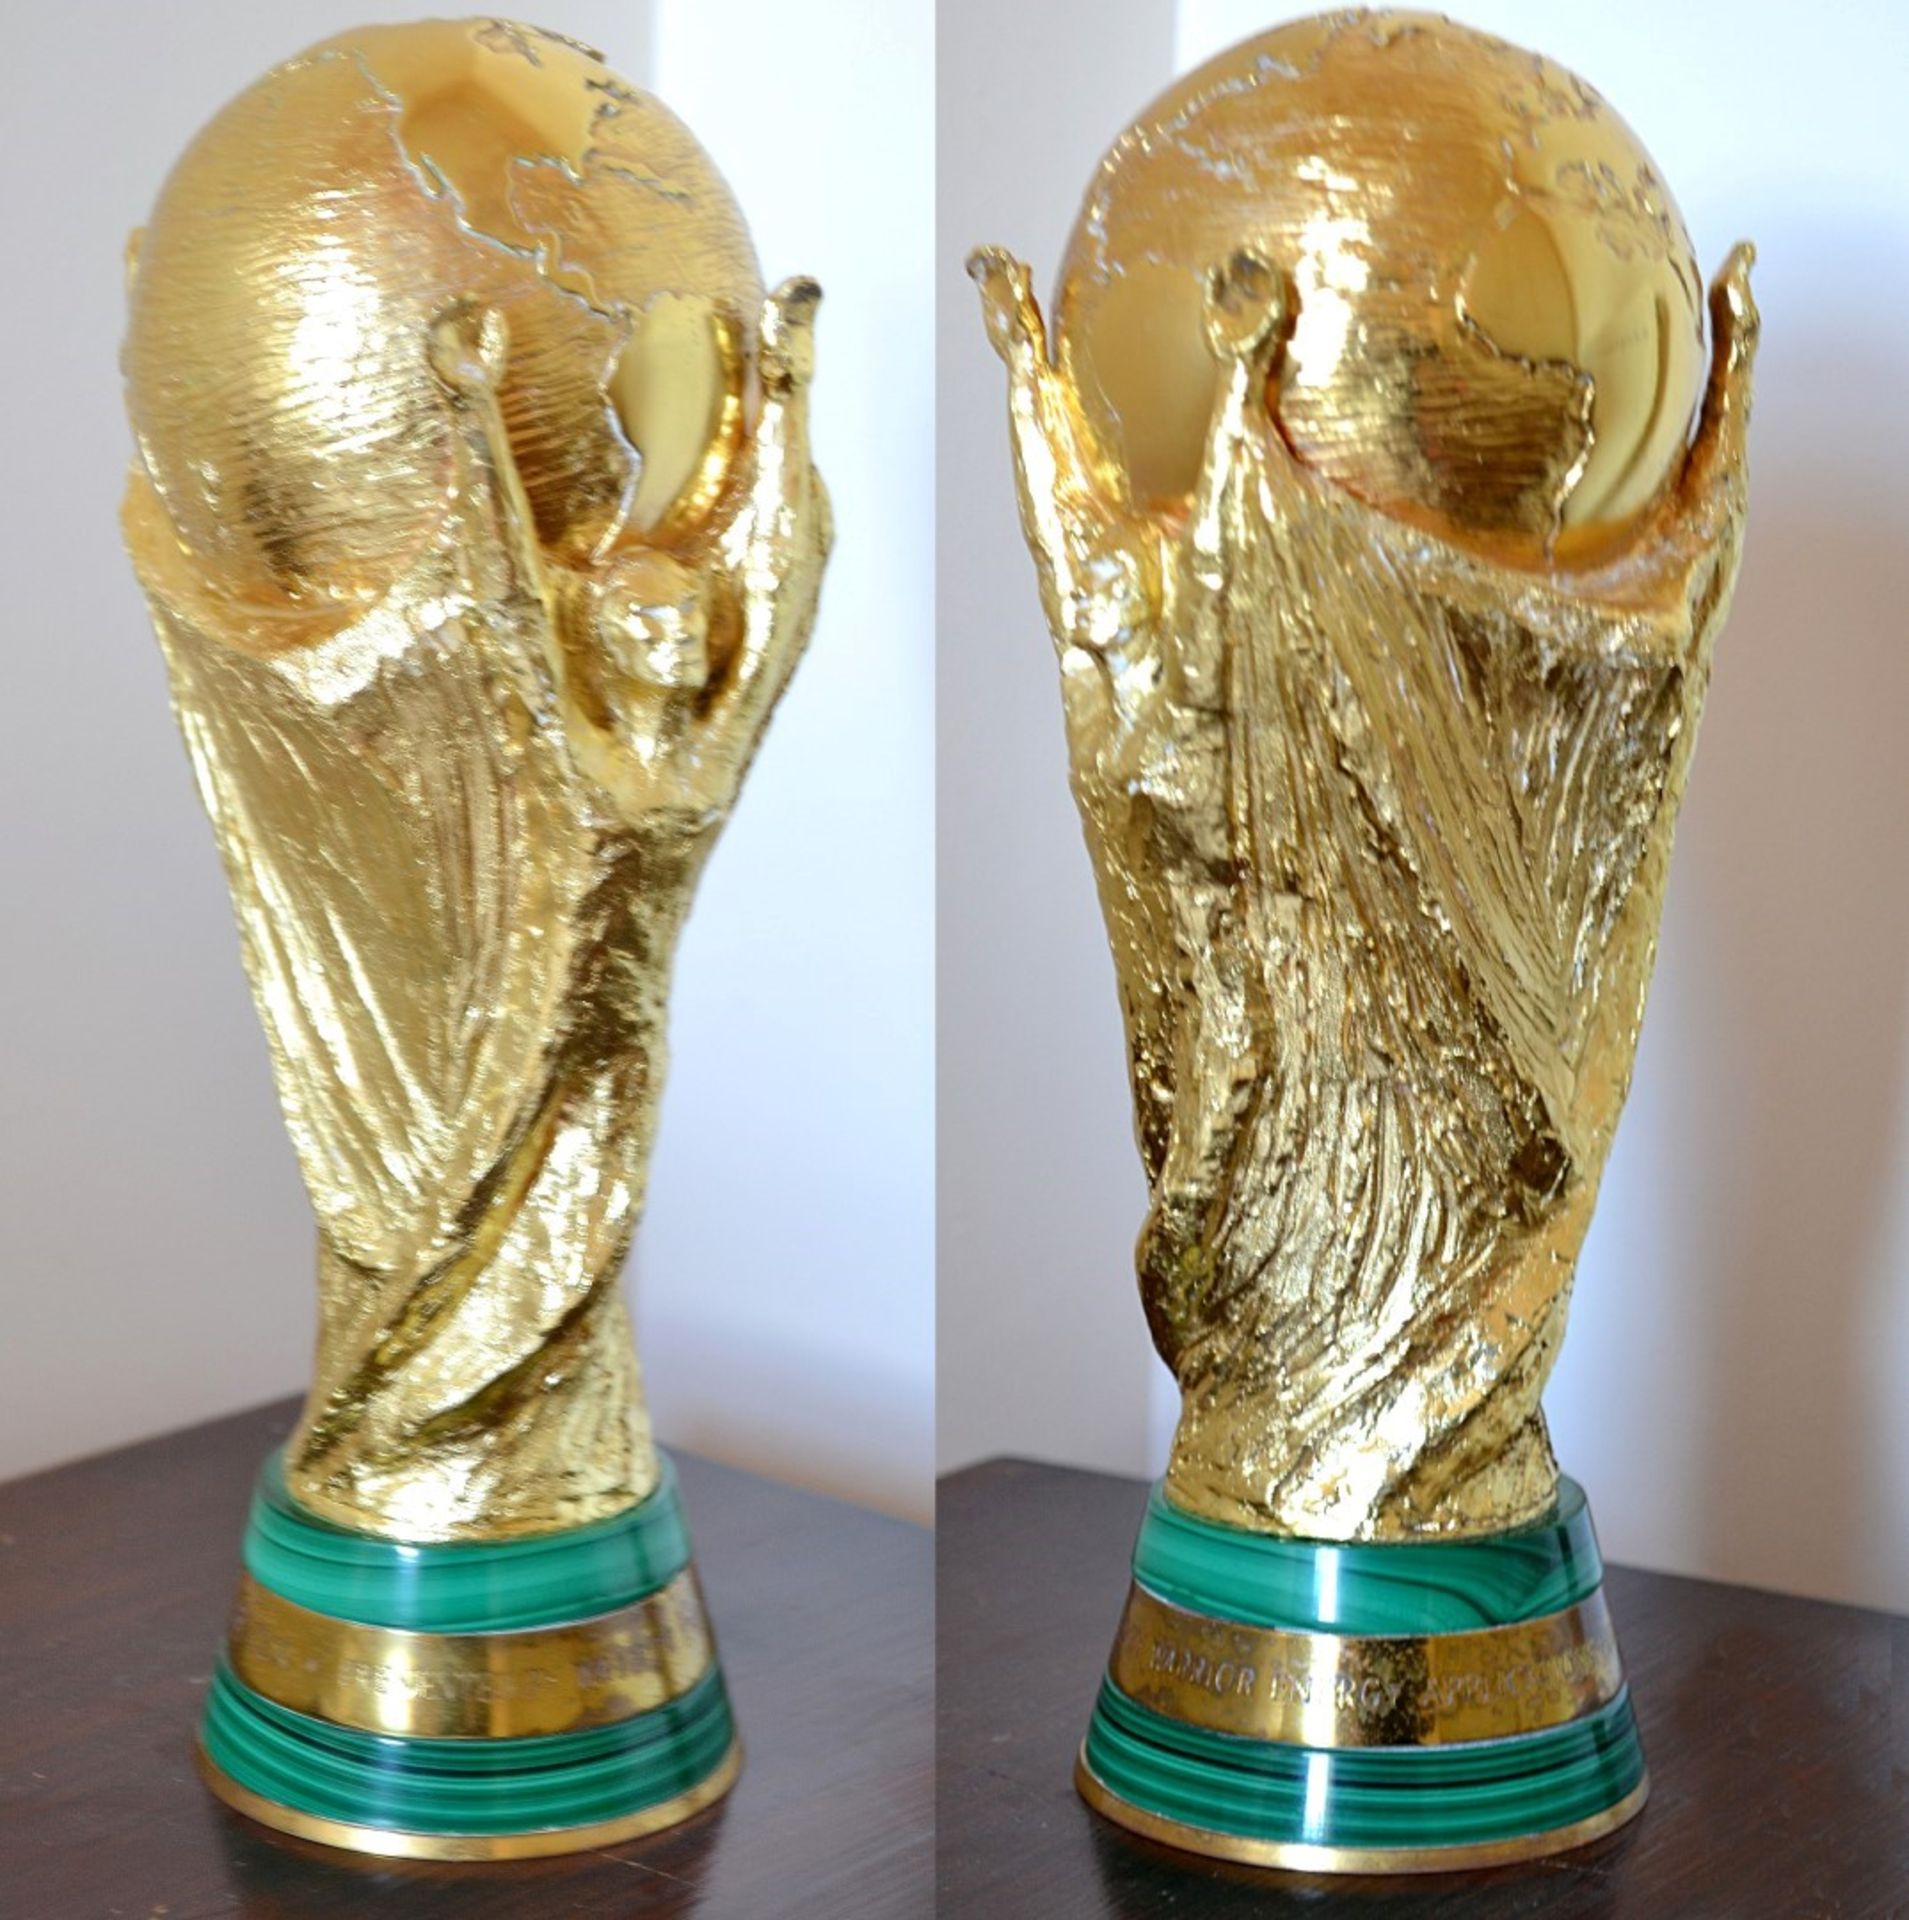 1 x Official World Cup 1:1.3 Scale 27cm Replica By Gerrard & Co. - Gold Plated - No.8 Of Only 10 - Image 2 of 16